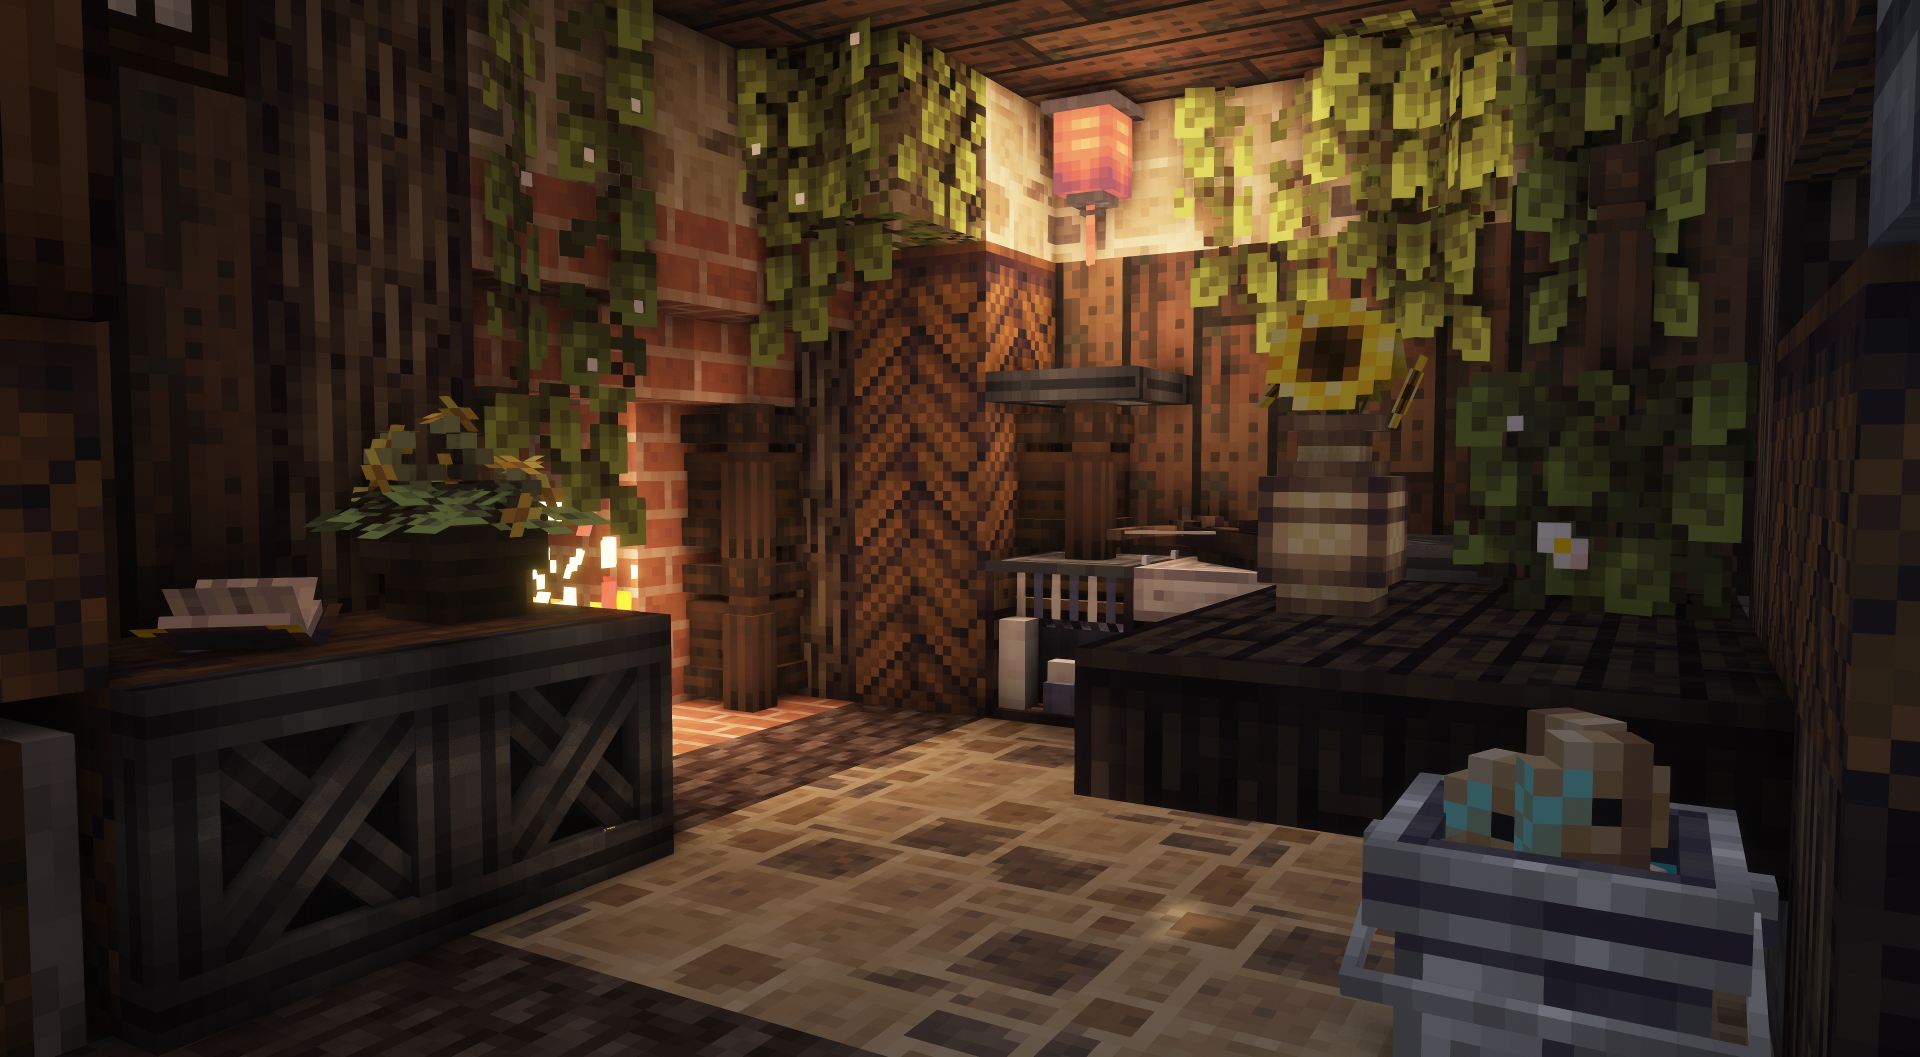 Minecraft 1.19 Resource Packs Free Download and Review